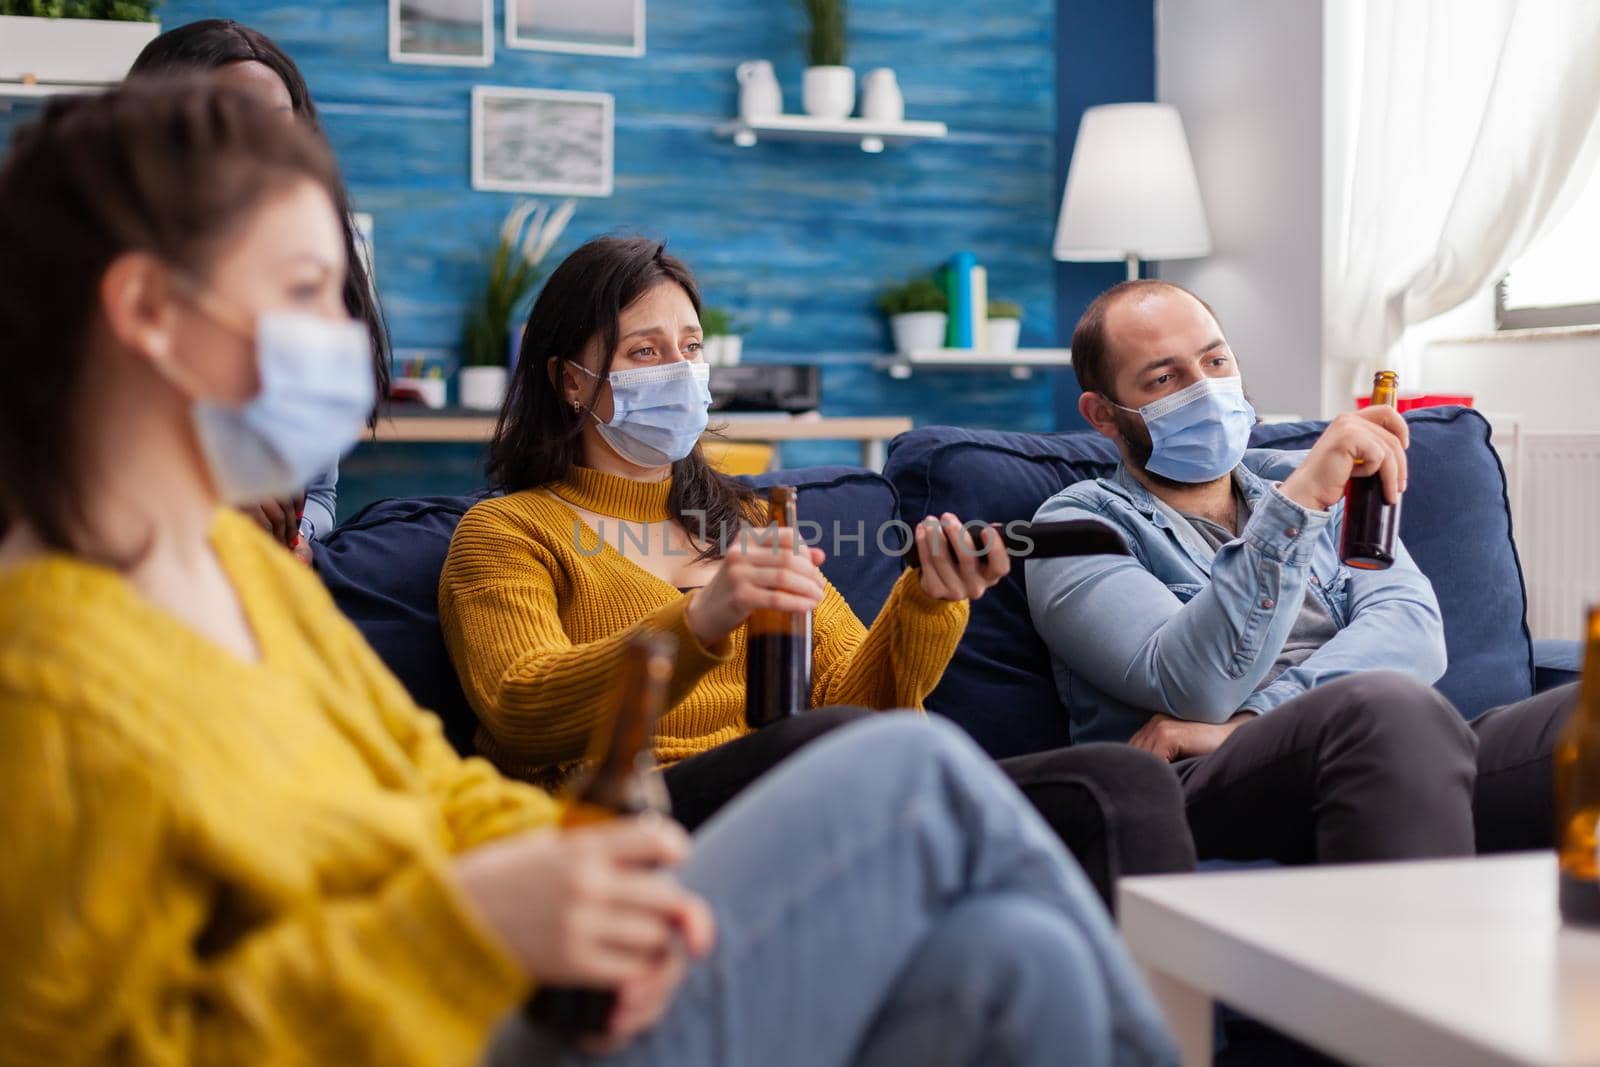 Multiethnic friends relaxing together watching tv using remote control keeping social distancing wearing face mask during coronavirus outbreak to prevent illness and sickness.